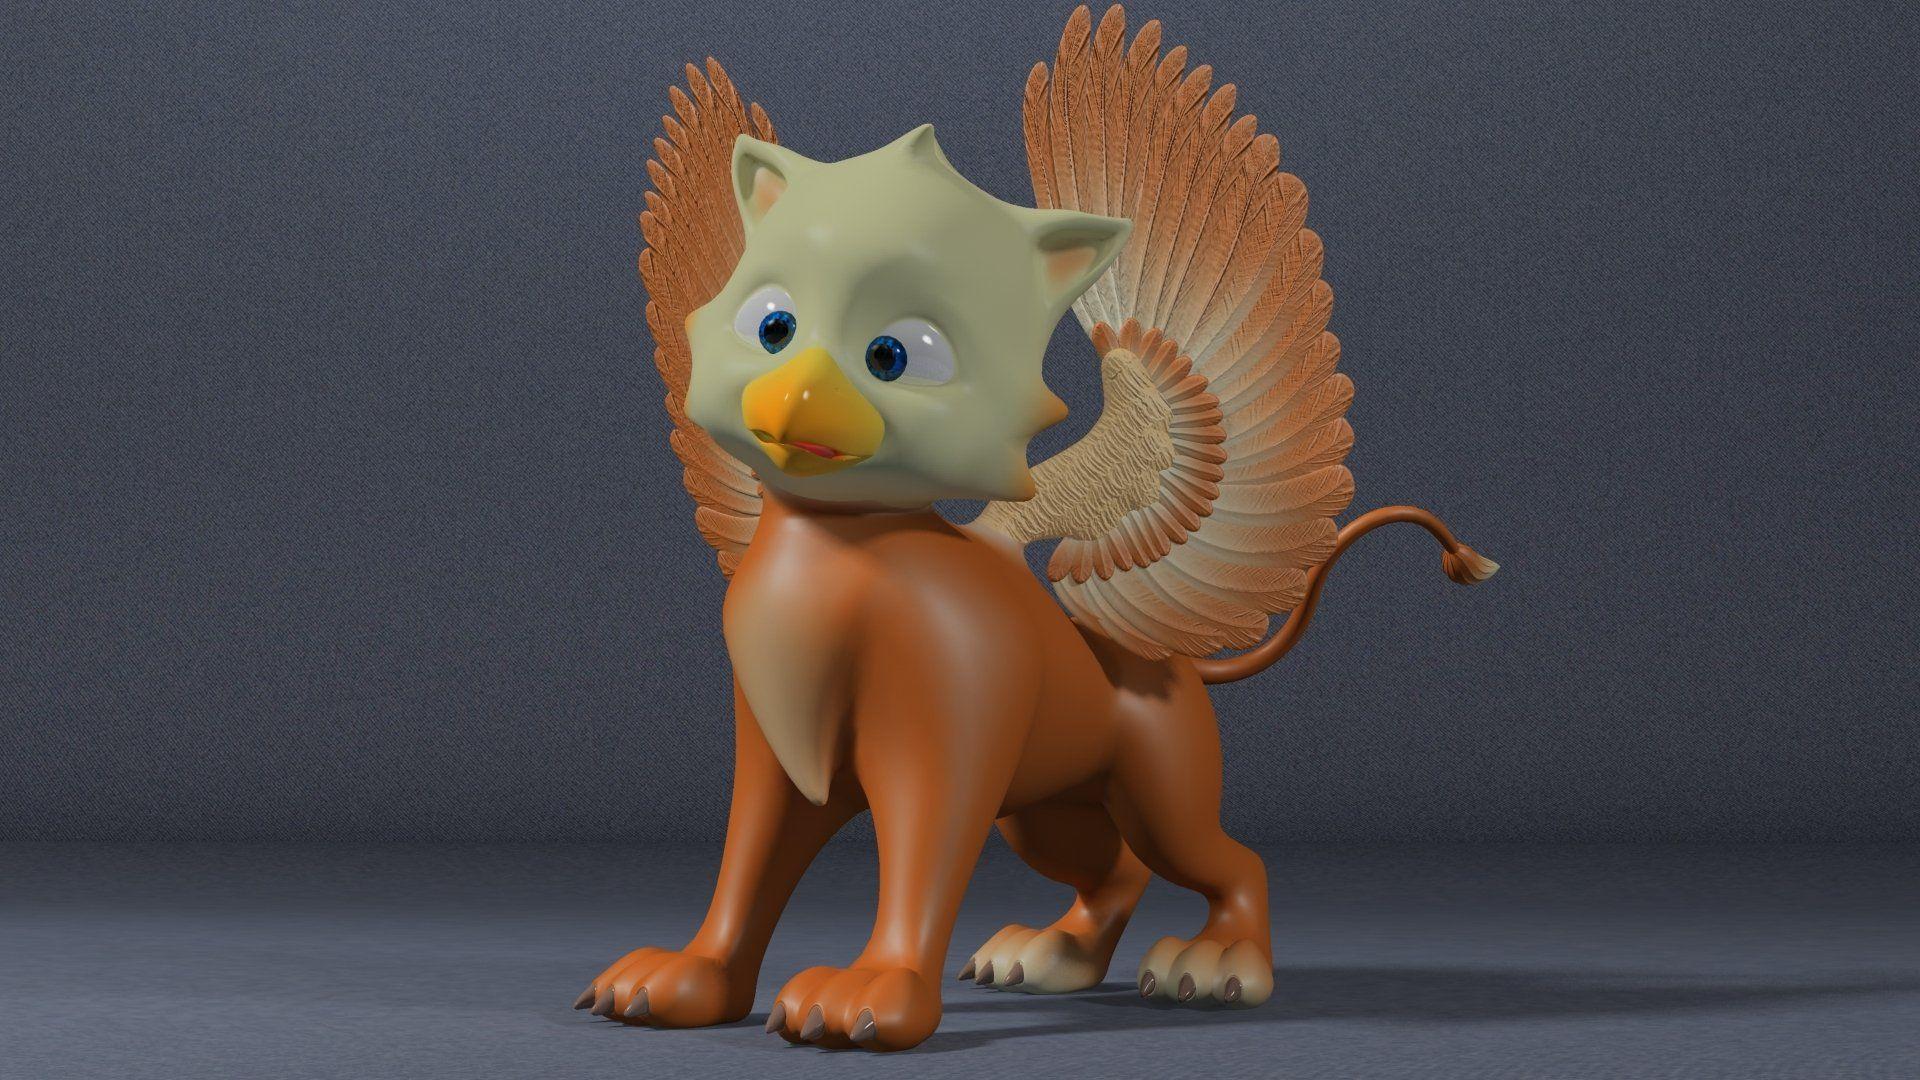 Baby Griffin 3D HD Wallpaper